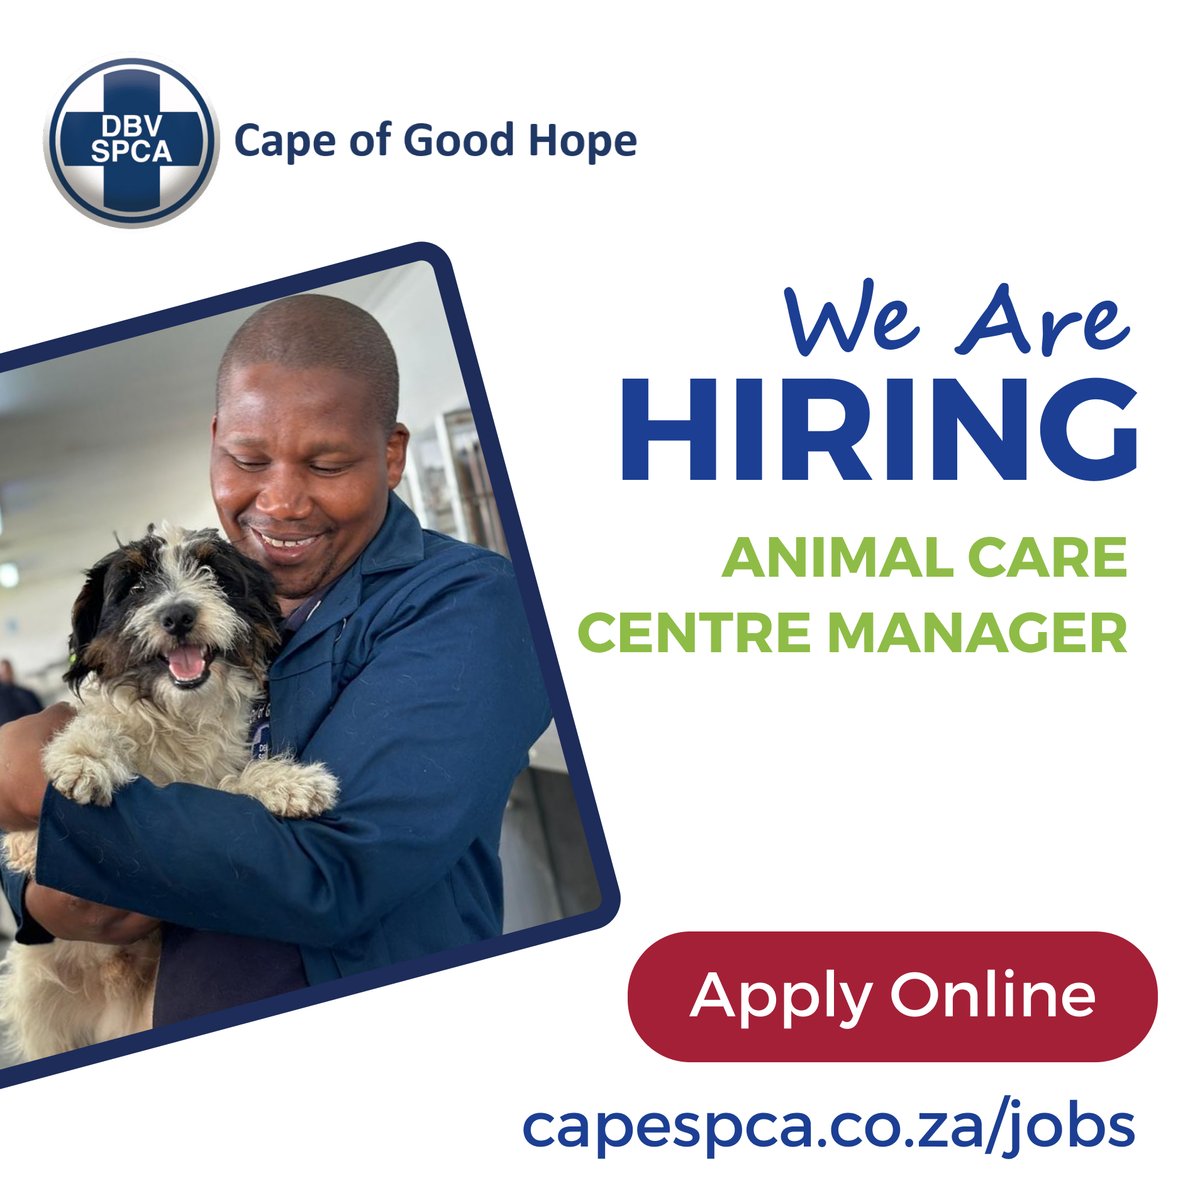 🚨 Join Our Team as an Animal Care Centre Manager at Cape of Good Hope SPCA! 🚨 See full job description here 👇 capespca.co.za/jobs/ #SPCAJobs #CapeSPCAHiring #CapeSPCA #WorkForImpact #CapeTown #GrassyPark #AnimalCareCentreManager #AnimalRescue #AnimalProtection